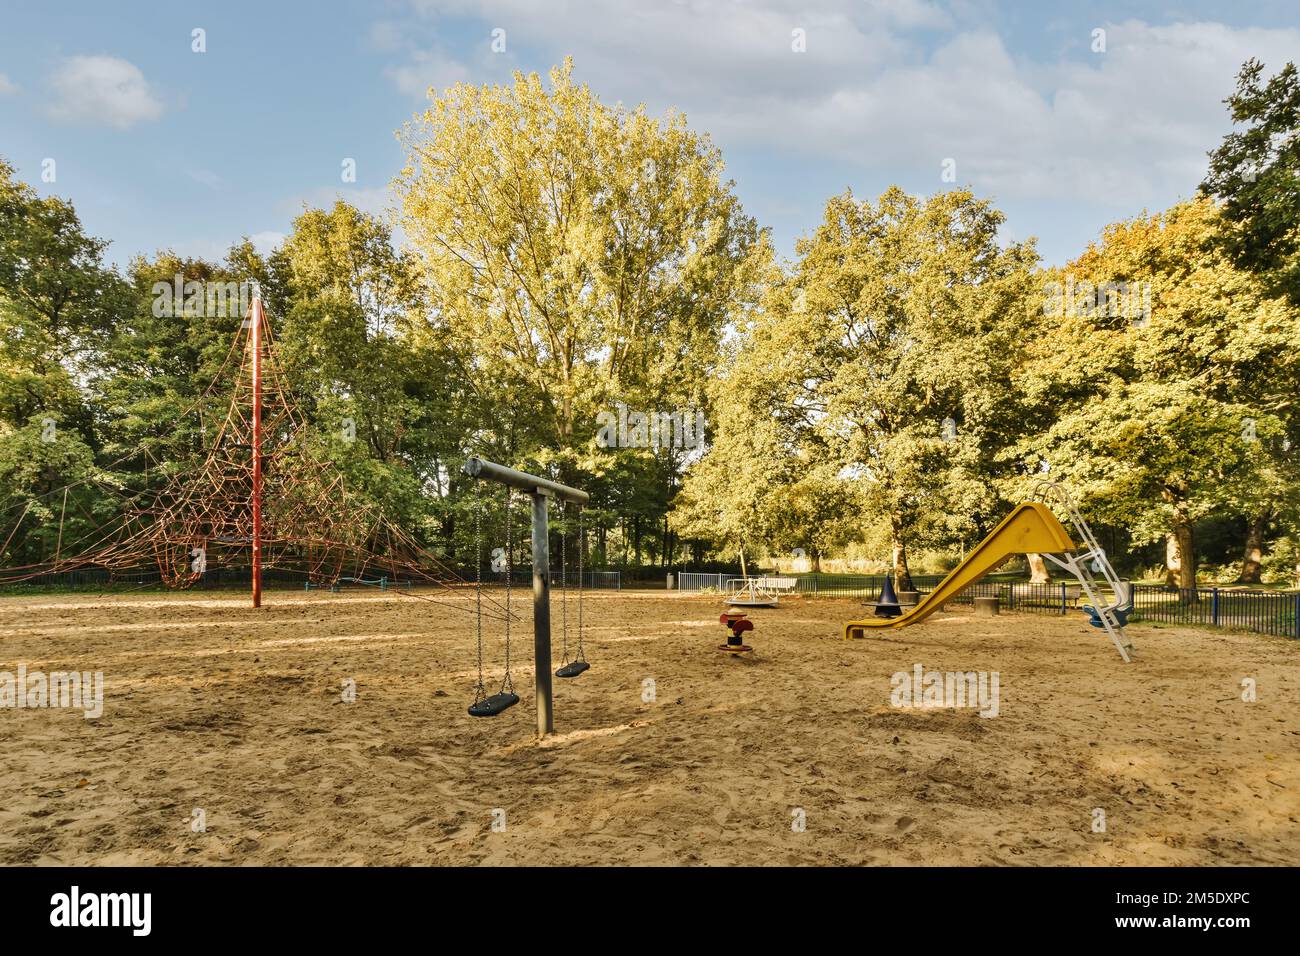 a playground with swings, slides and slides on the ground in front of trees that are turning to yellow leaves Stock Photo